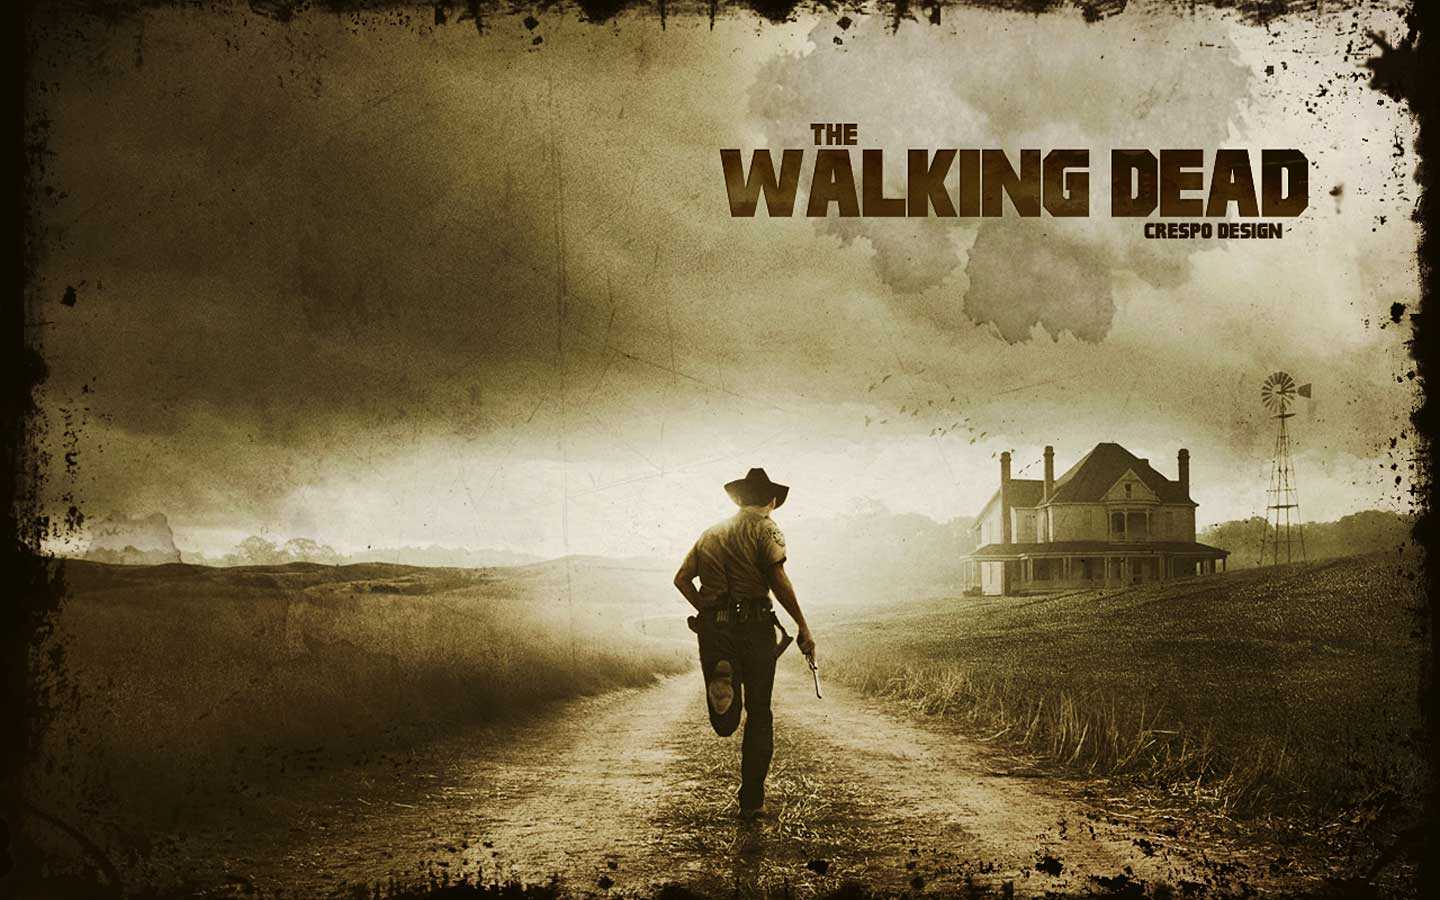 The Walking Dead HD Wallpaper High Quality For Androids Resolution